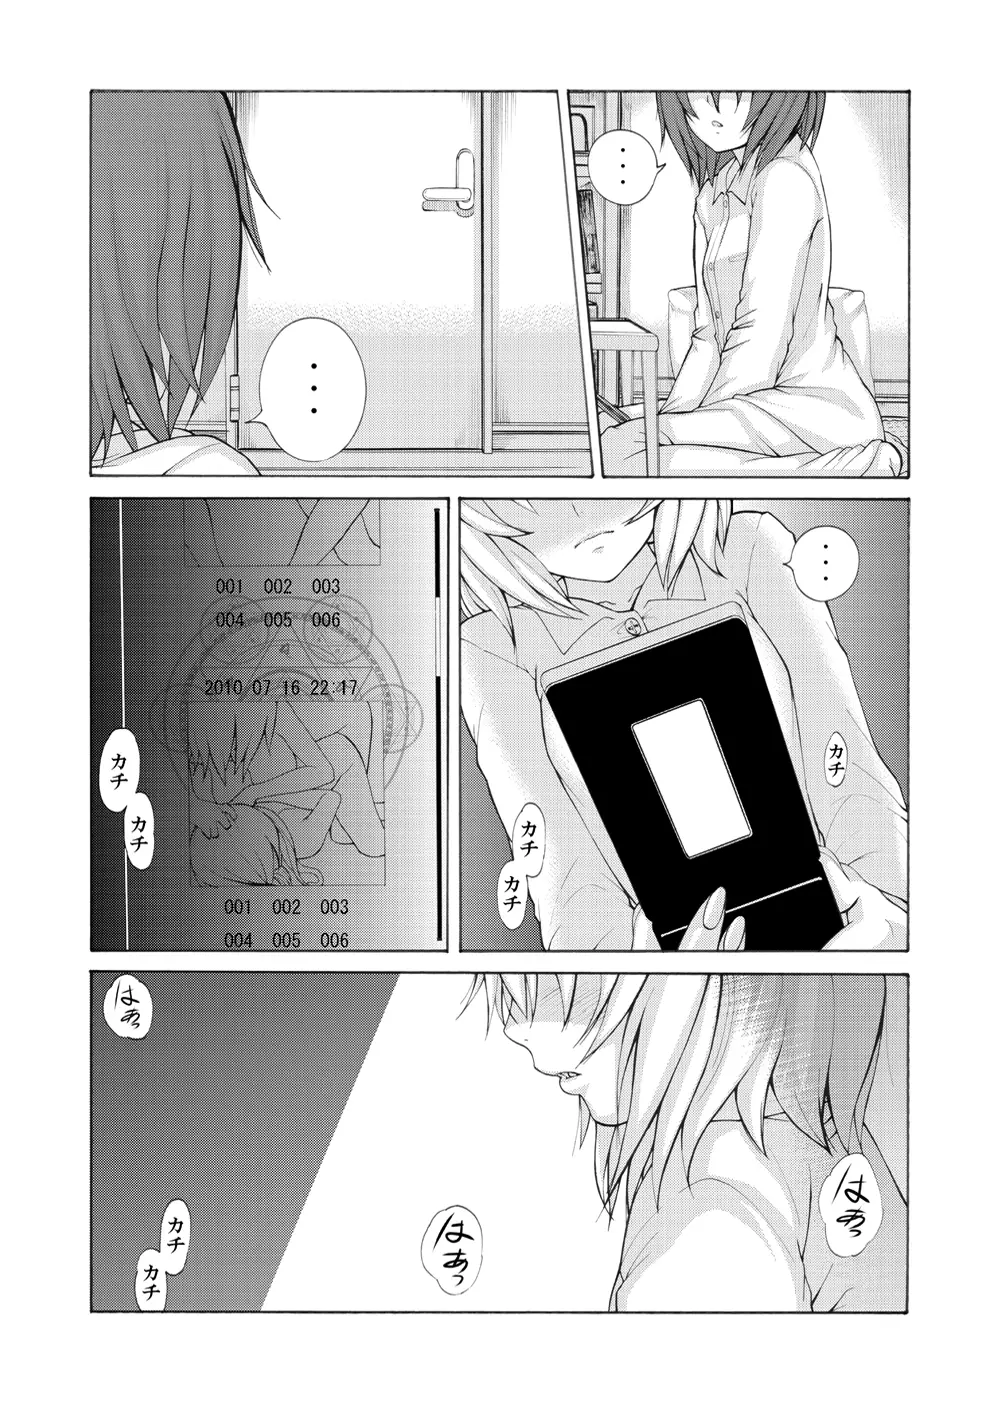 [remora works] FUTACOLO CO -WITCH CRAFT- feat.カラス VOL.003 - page4